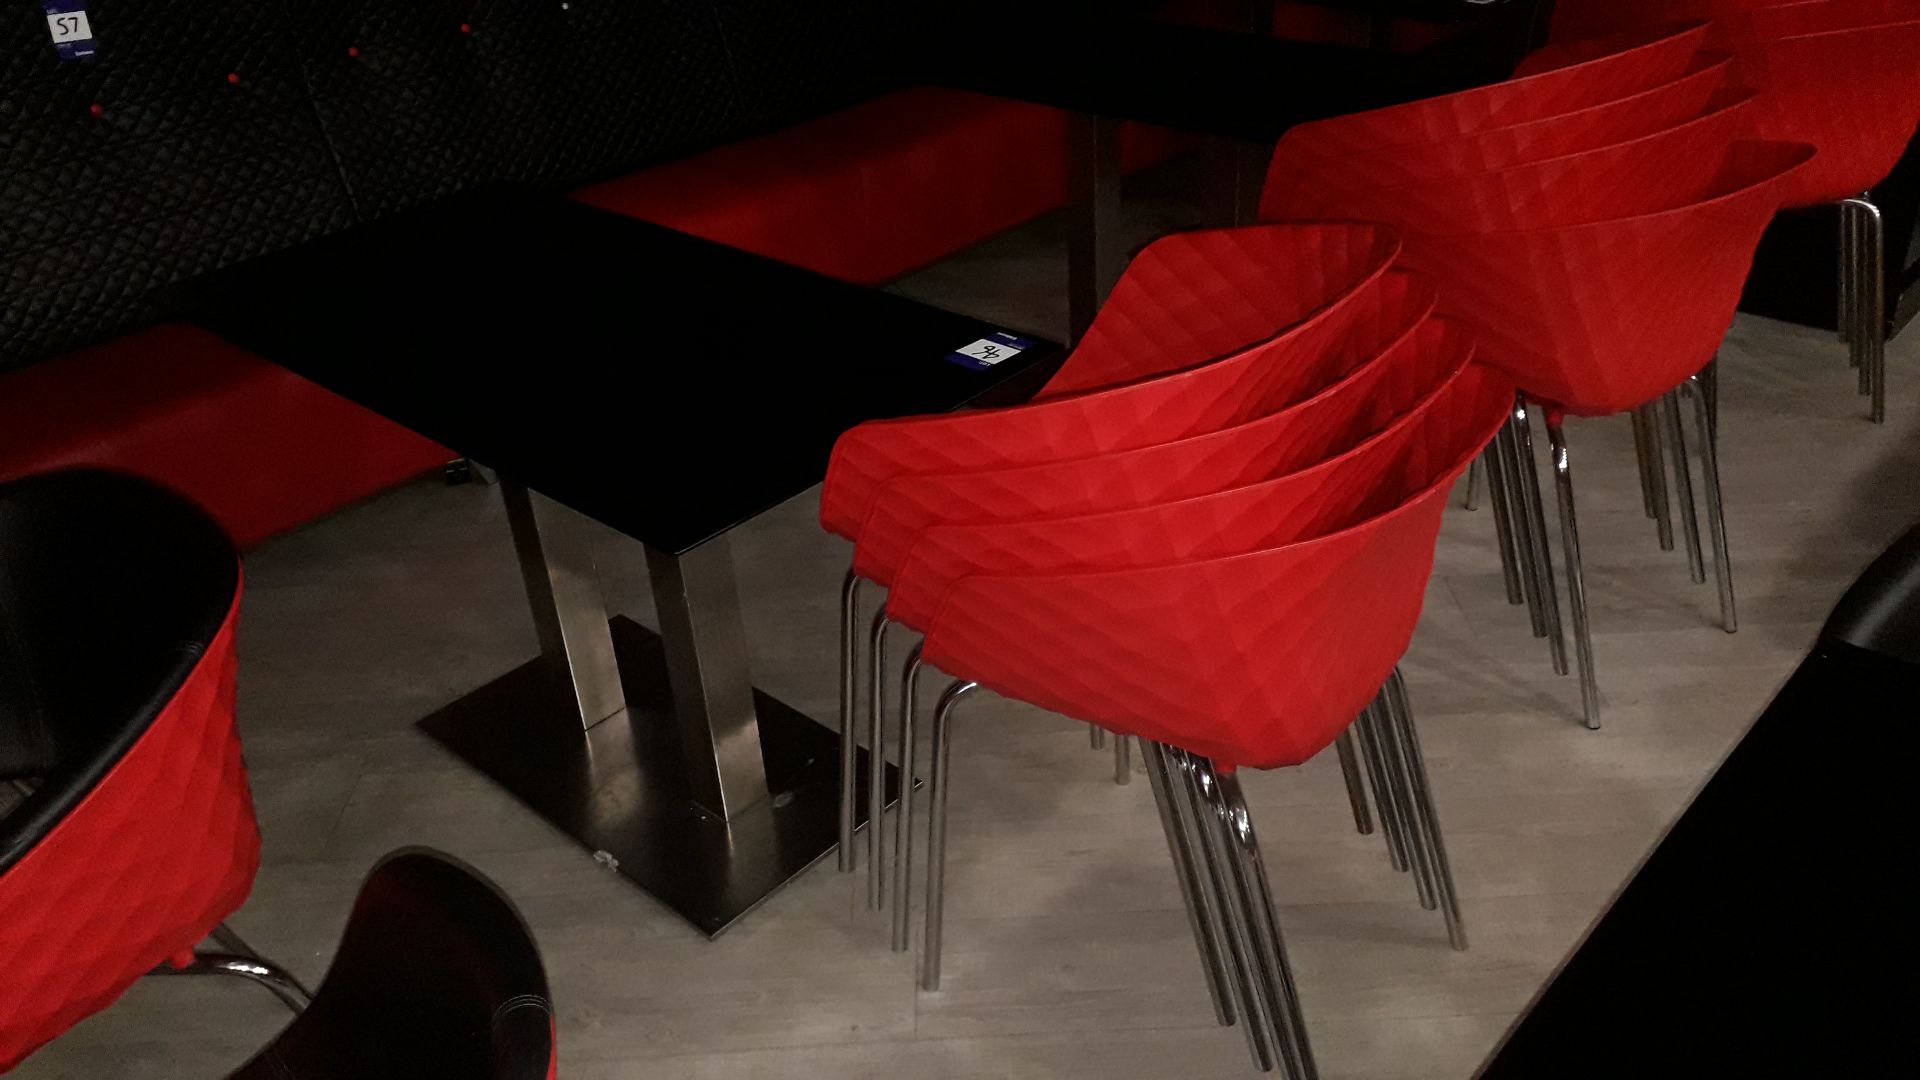 4 x Metamobil red plastic stackable chairs and chrome based pedestal table (1,200mm)